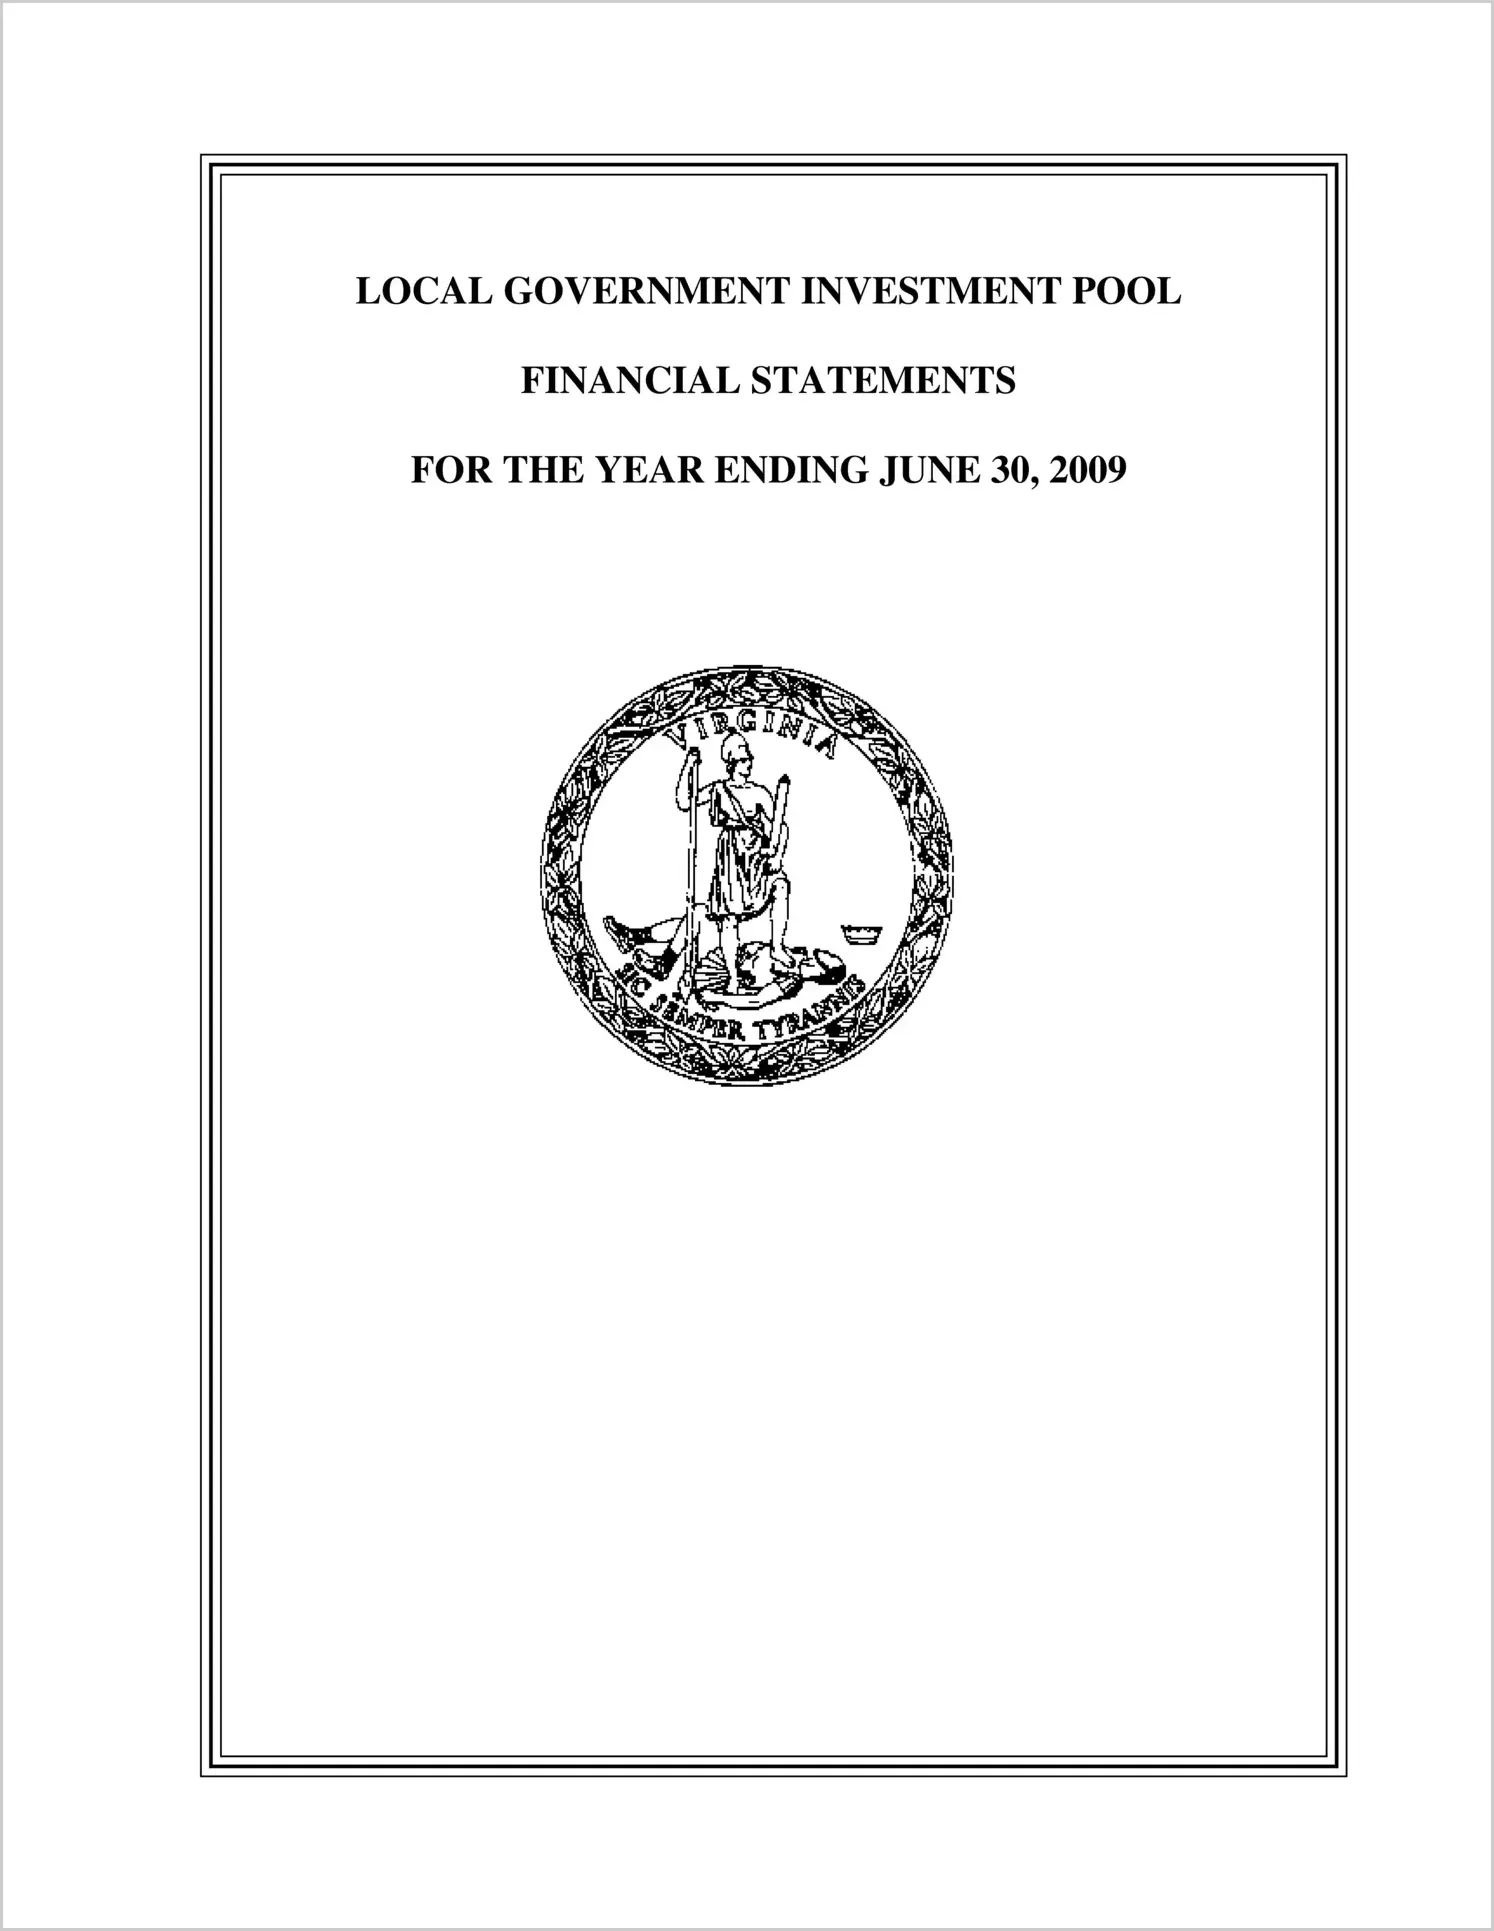 Local Government Investment Pool Financial Statements for the year ended June 30, 2009